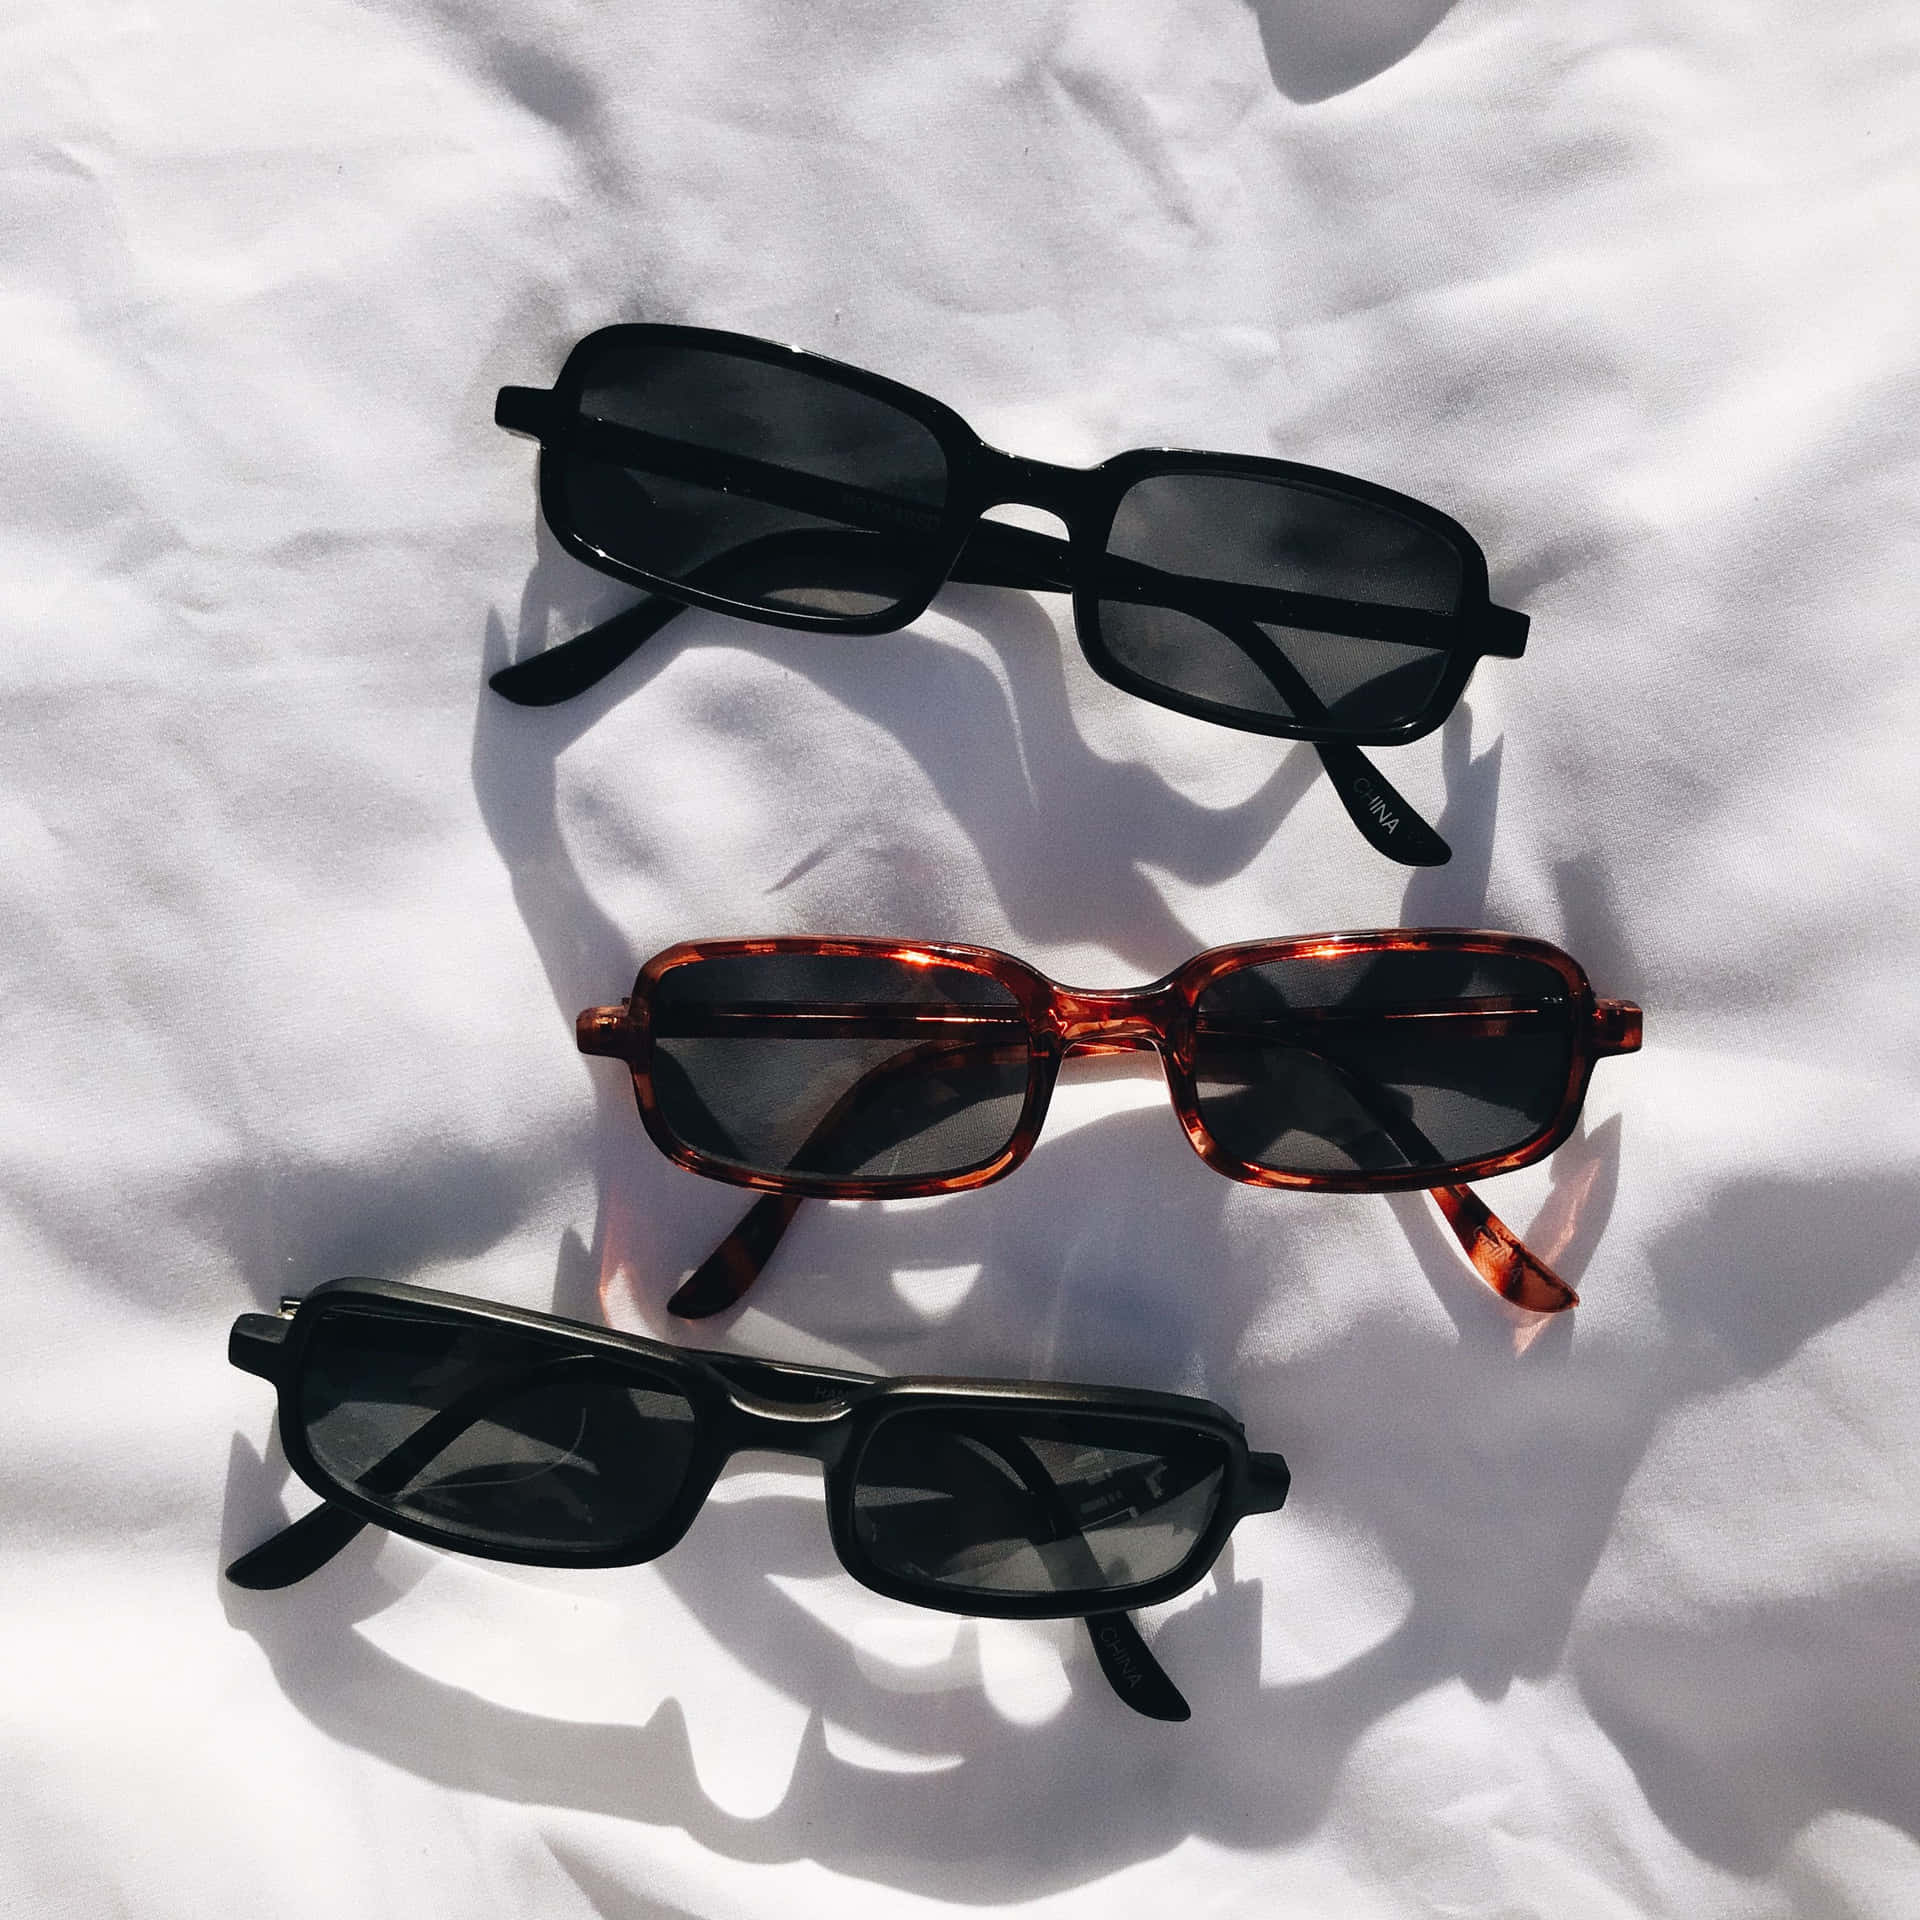 Get the perfect pair of sunglasses this summer!